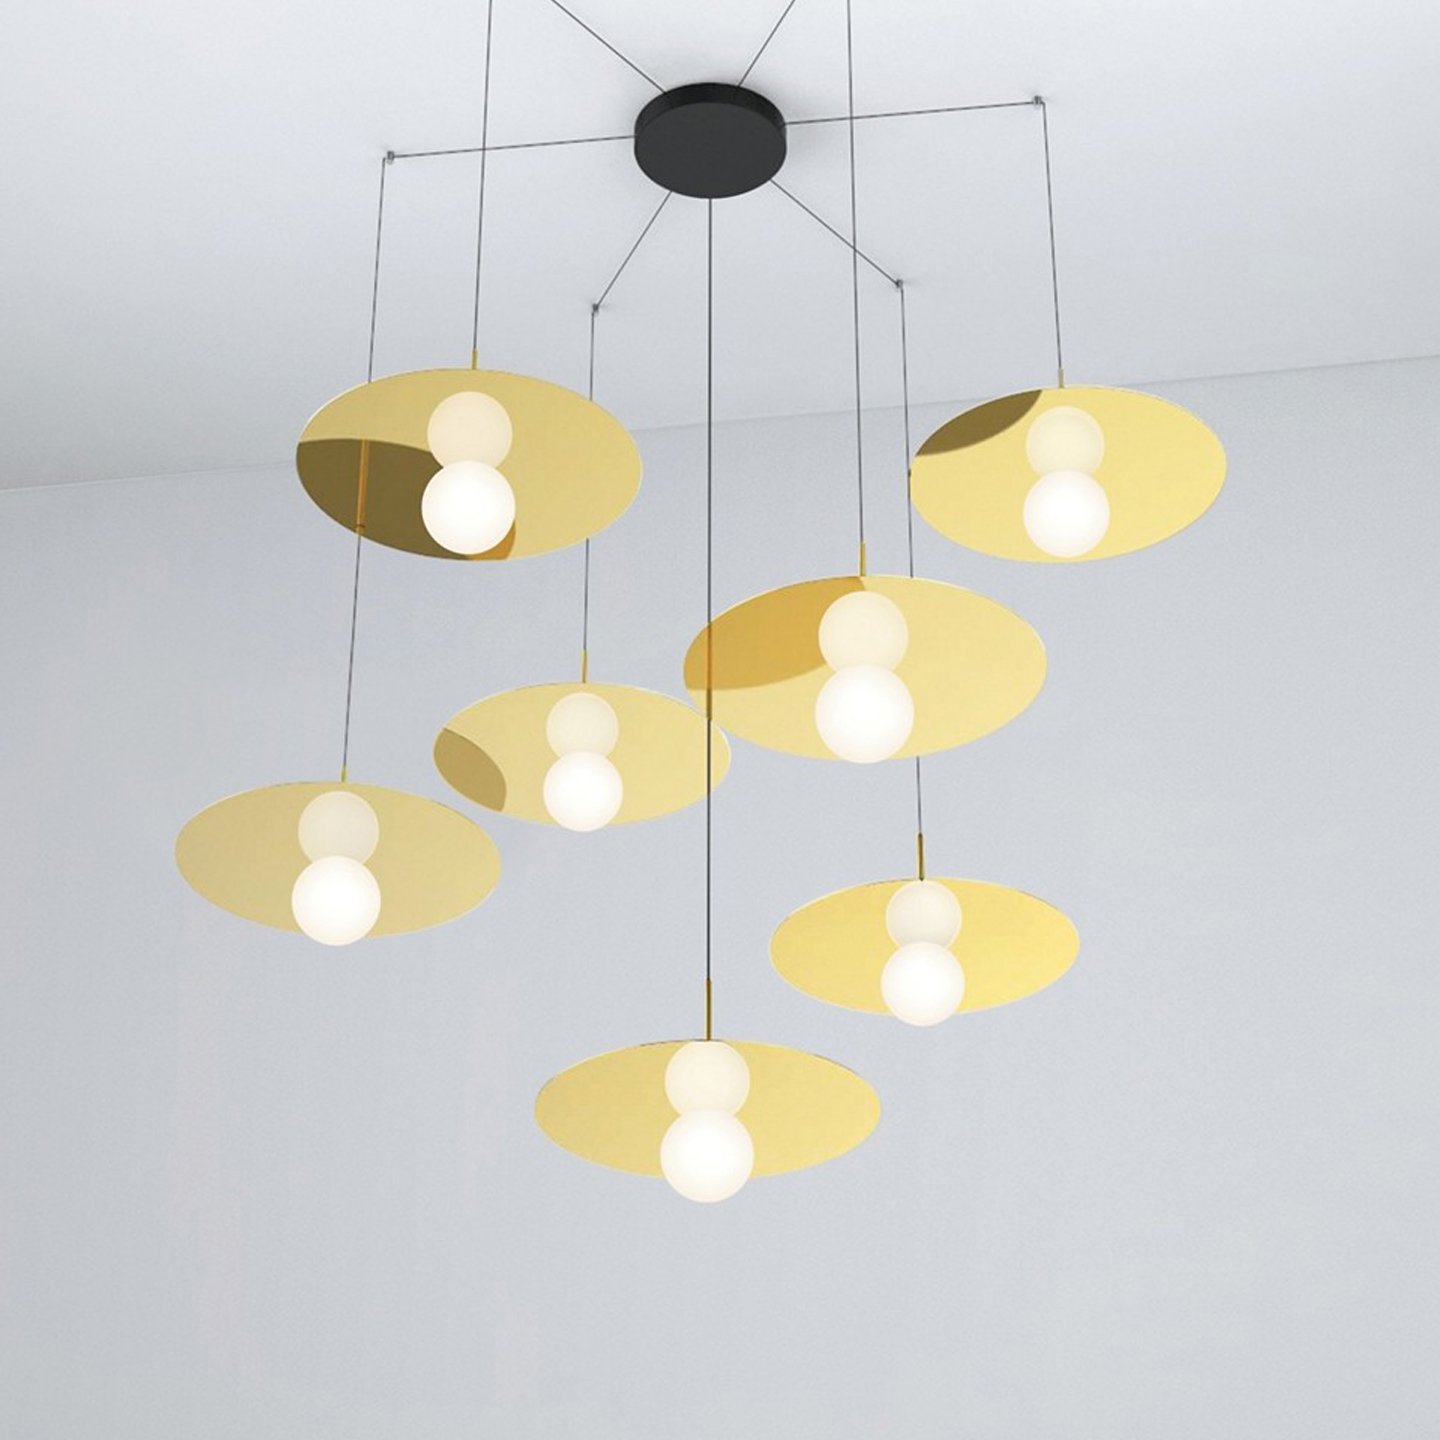 Haworth Bola Disc Lighting with gold metal disc coming down from ceiling 